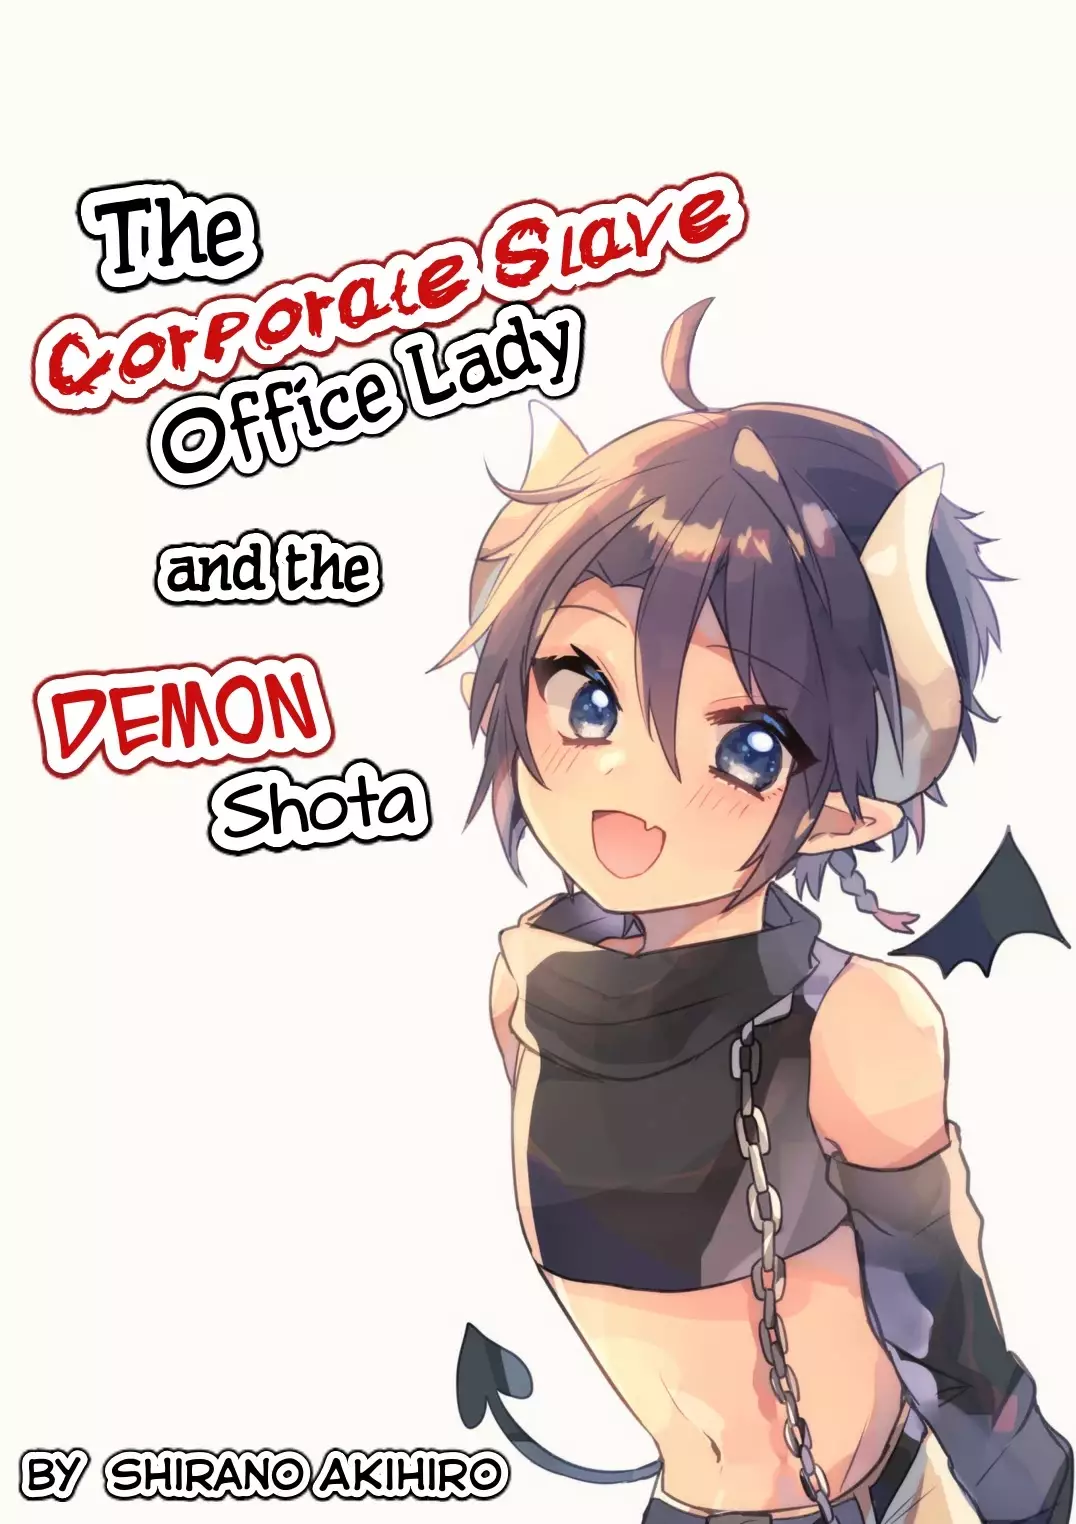 The Corporate Slave Ol And The Demon Shota - 1 page 1-db04f8bd